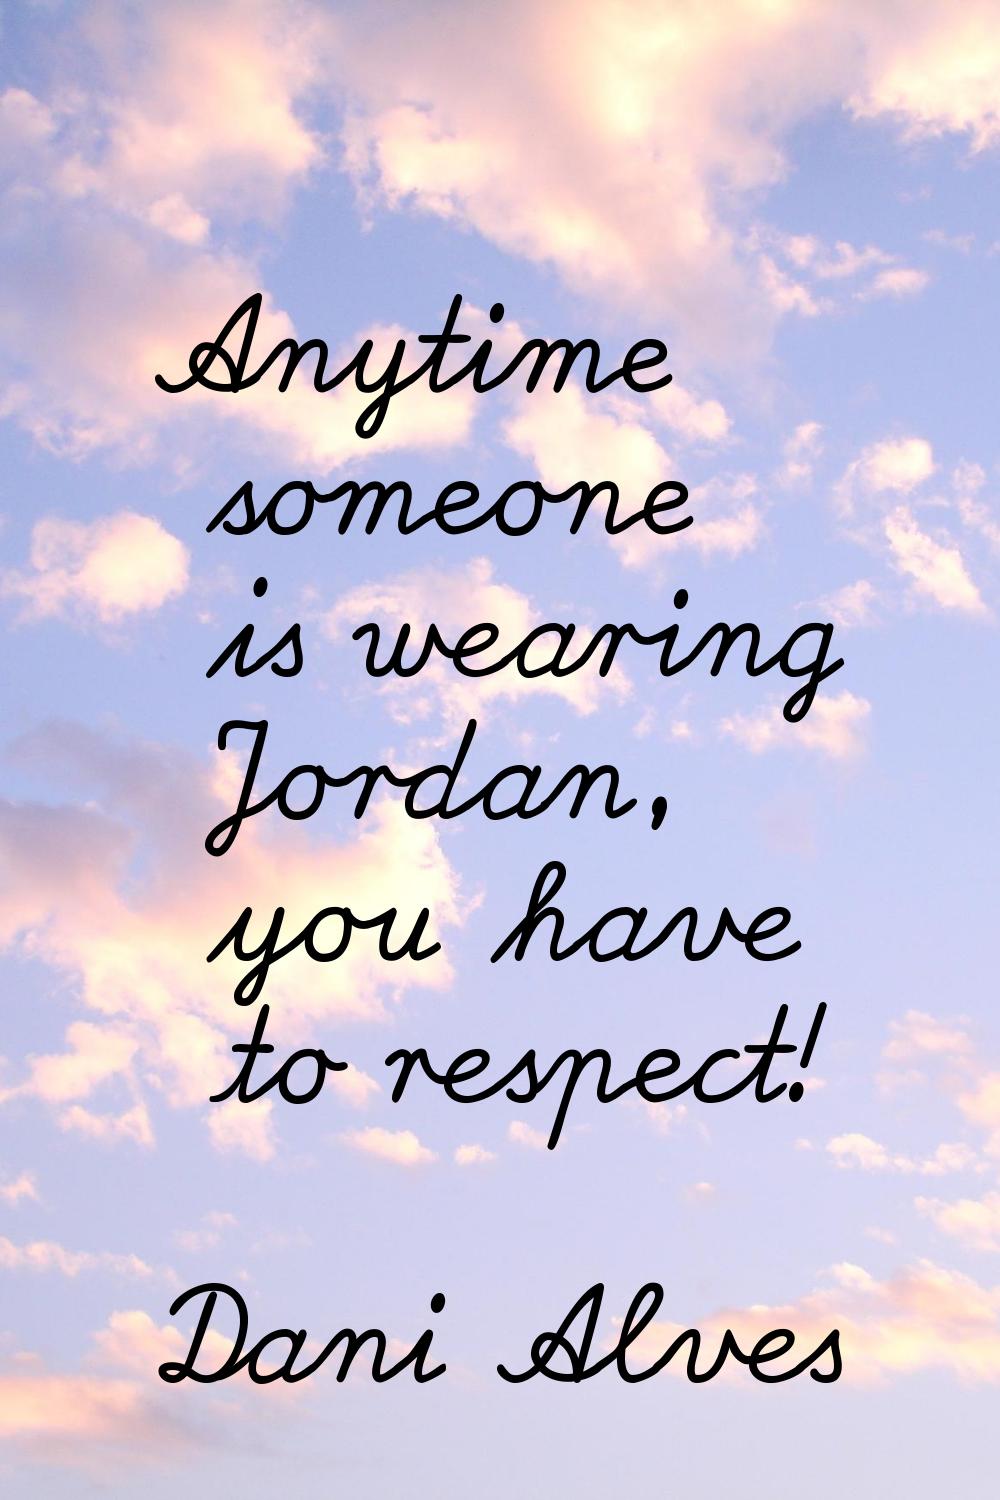 Anytime someone is wearing Jordan, you have to respect!